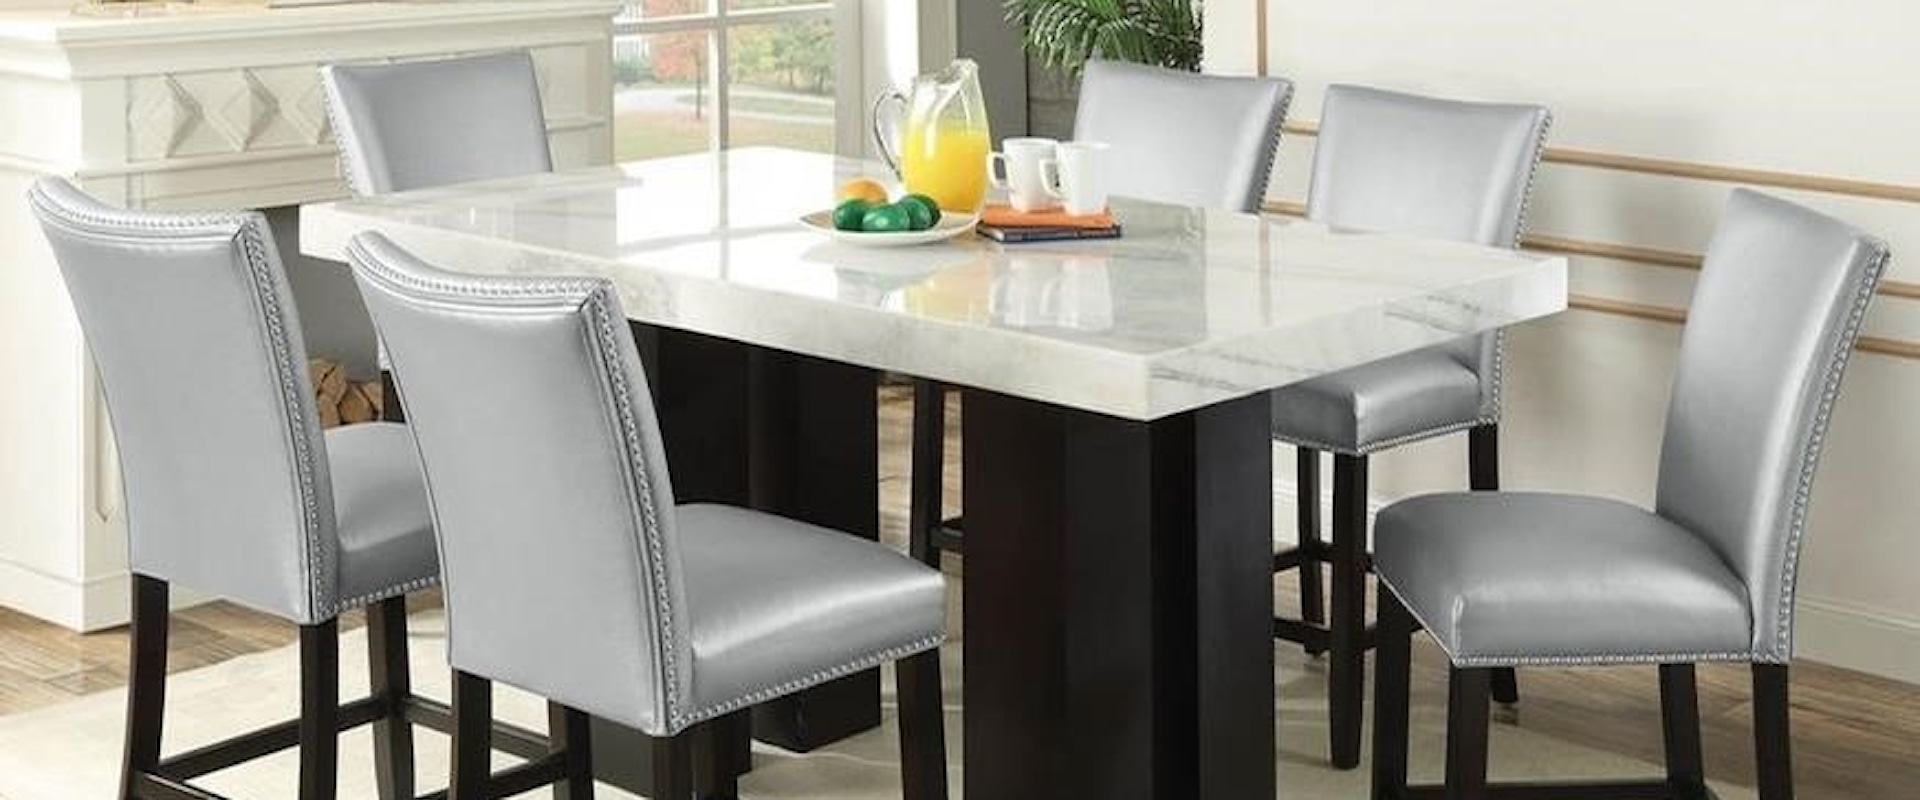 7 Piece Counter Height Dining Set with Marble Table Top